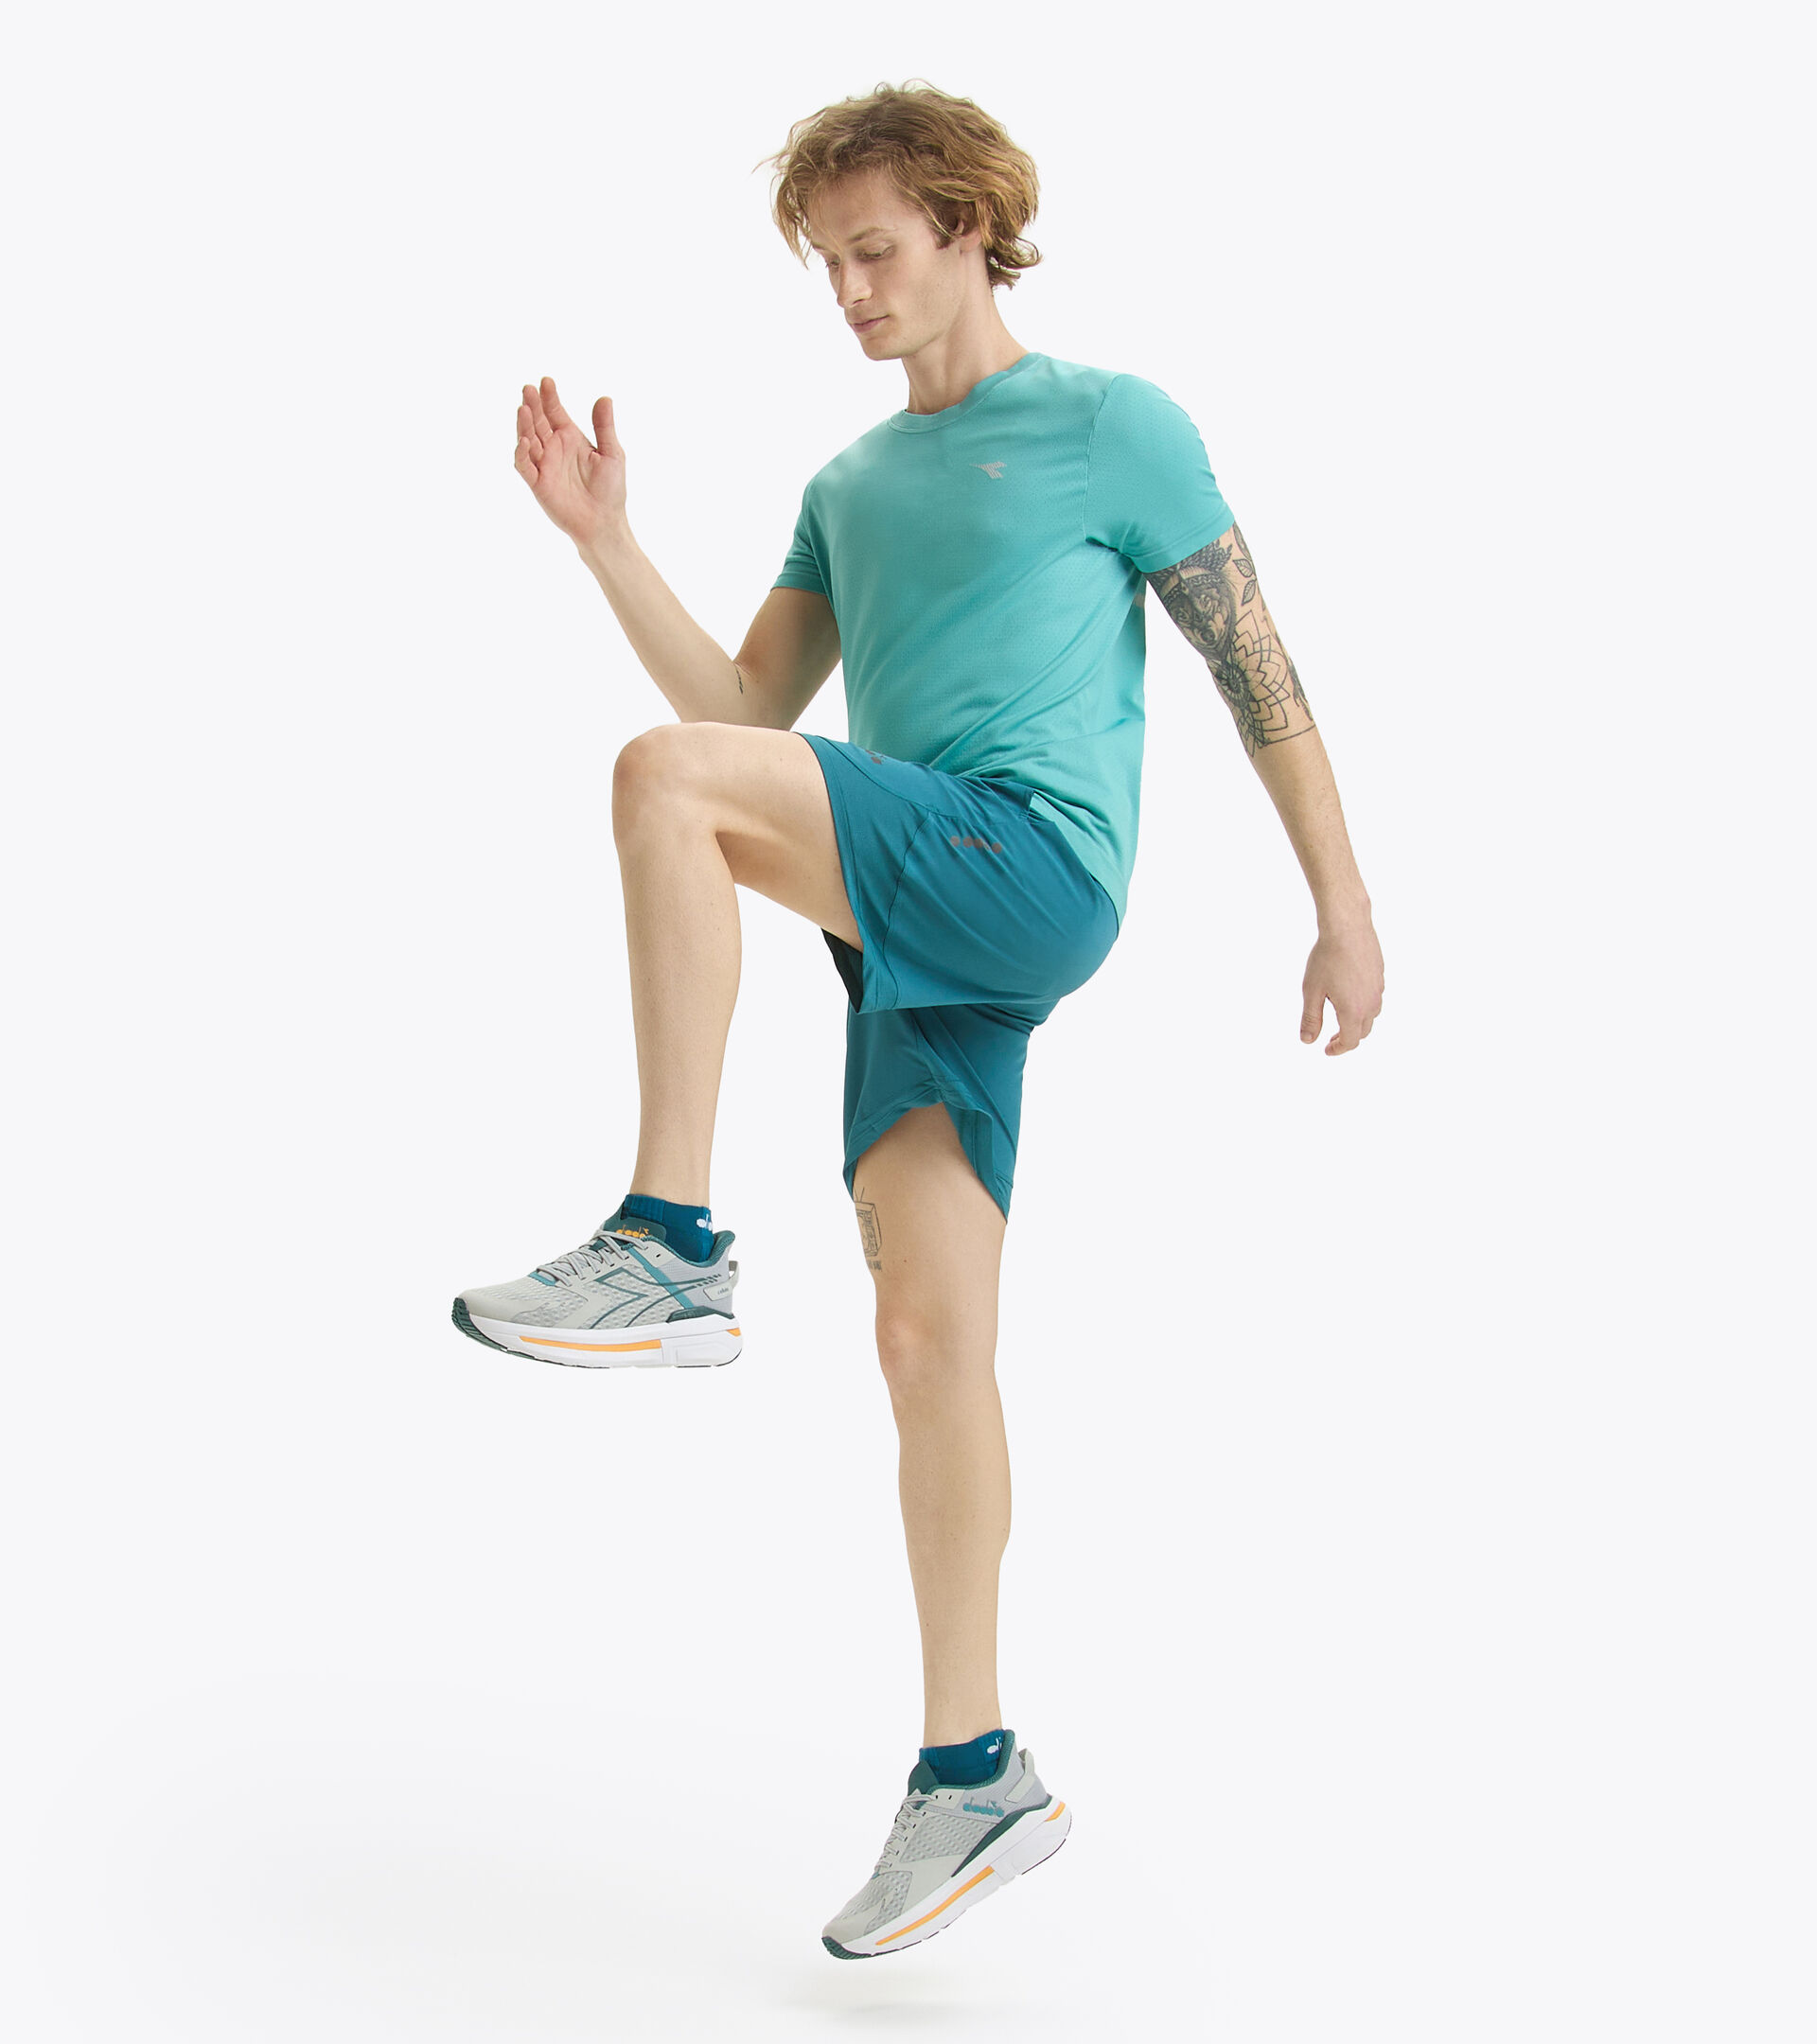 Camiseta de running sin costuras - Made in Italy - Hombre SS T-SHIRT SKIN FRIENDLY DUSTY TURQUOISE - Diadora